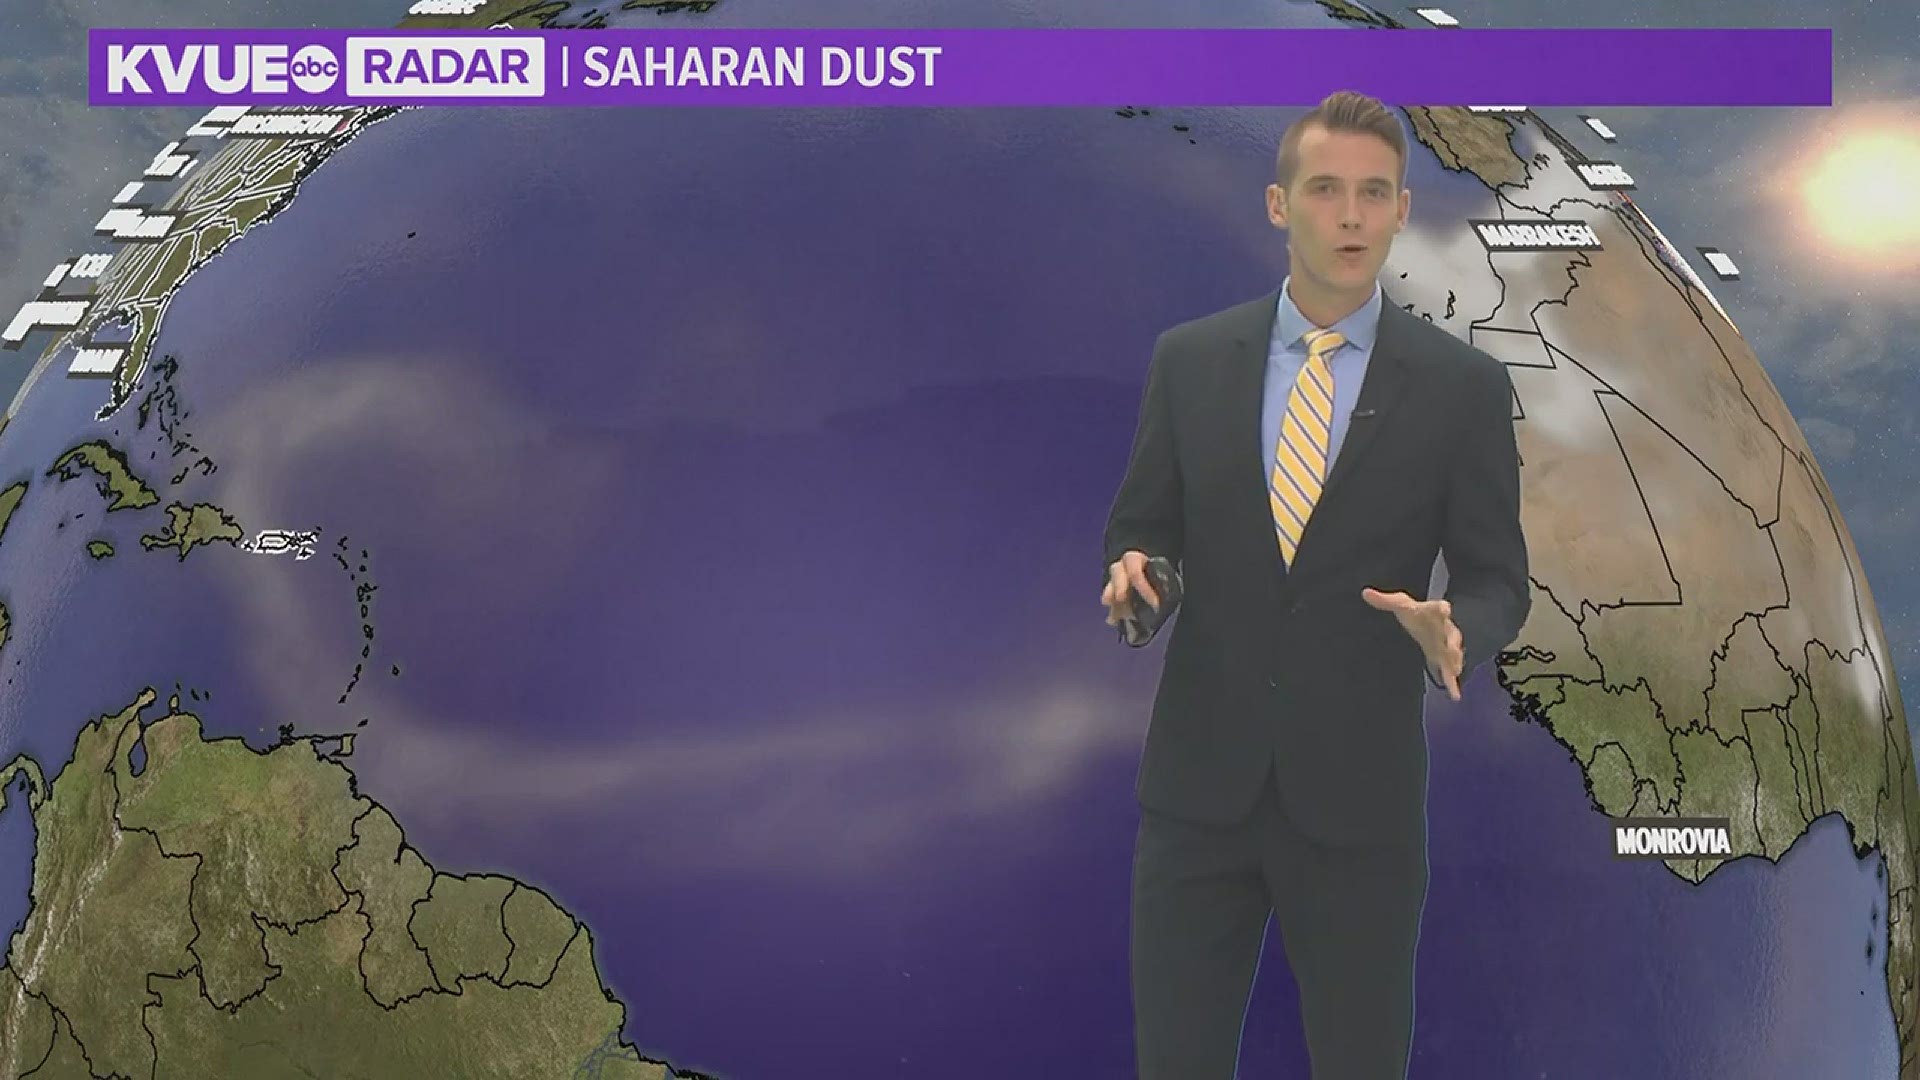 Saharan dust made its way to Central Texas on Sunday. This is the culprit for the hazy sky you may have noticed.